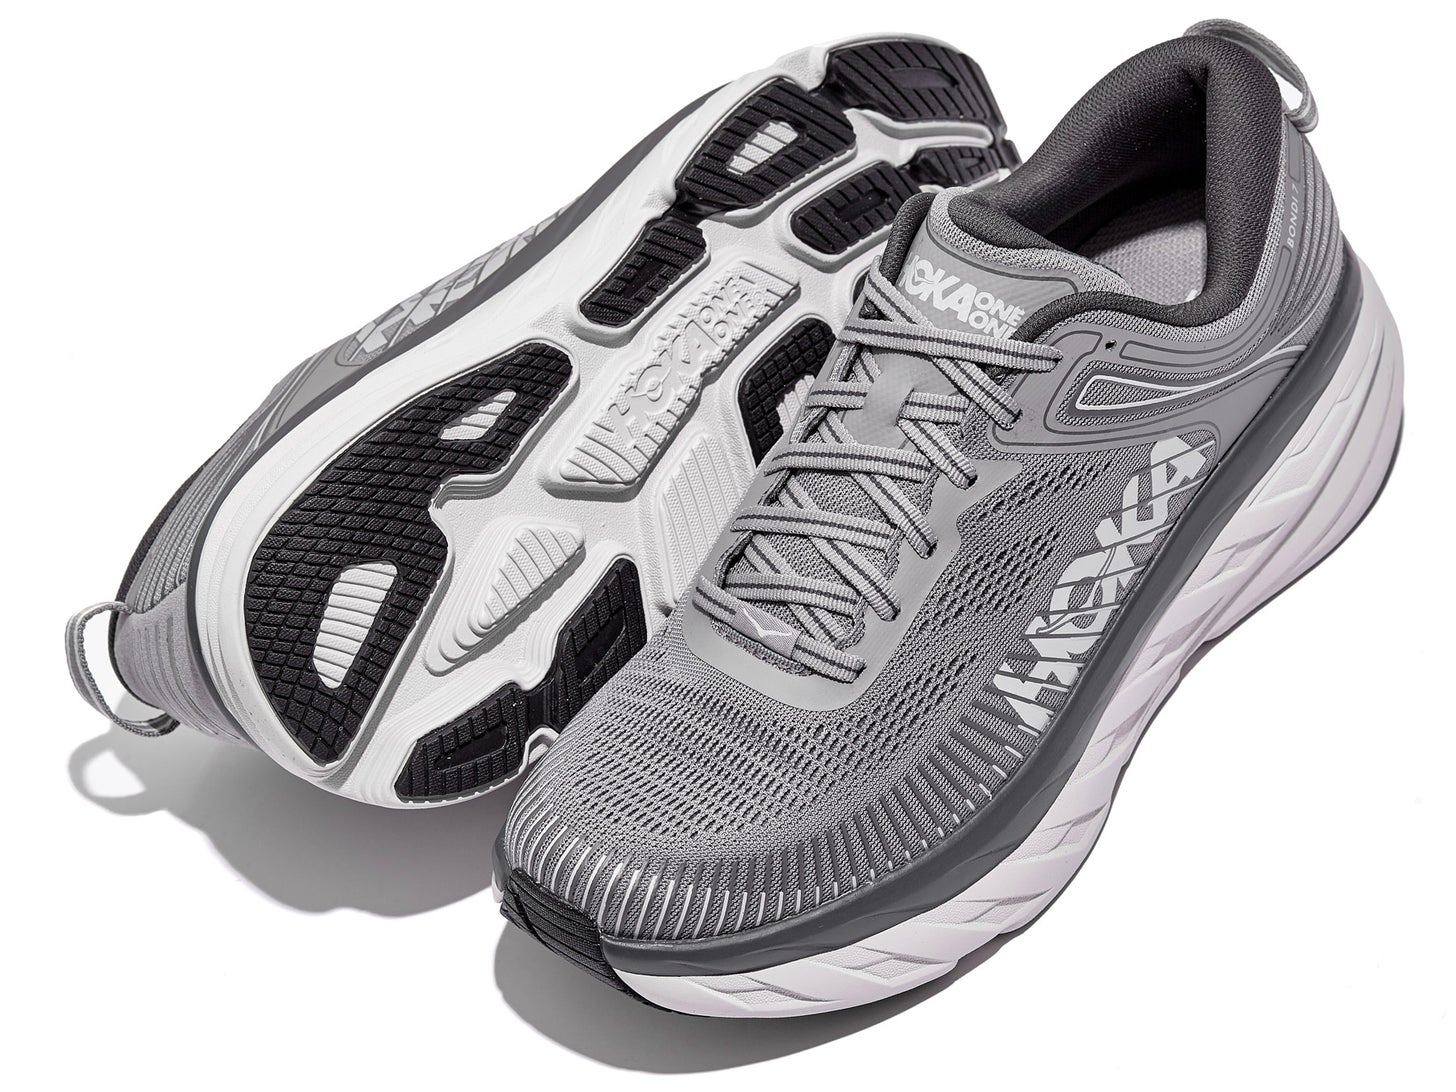 Best HOKA Shoes For Walking and Standing All Day Gear Guide Running